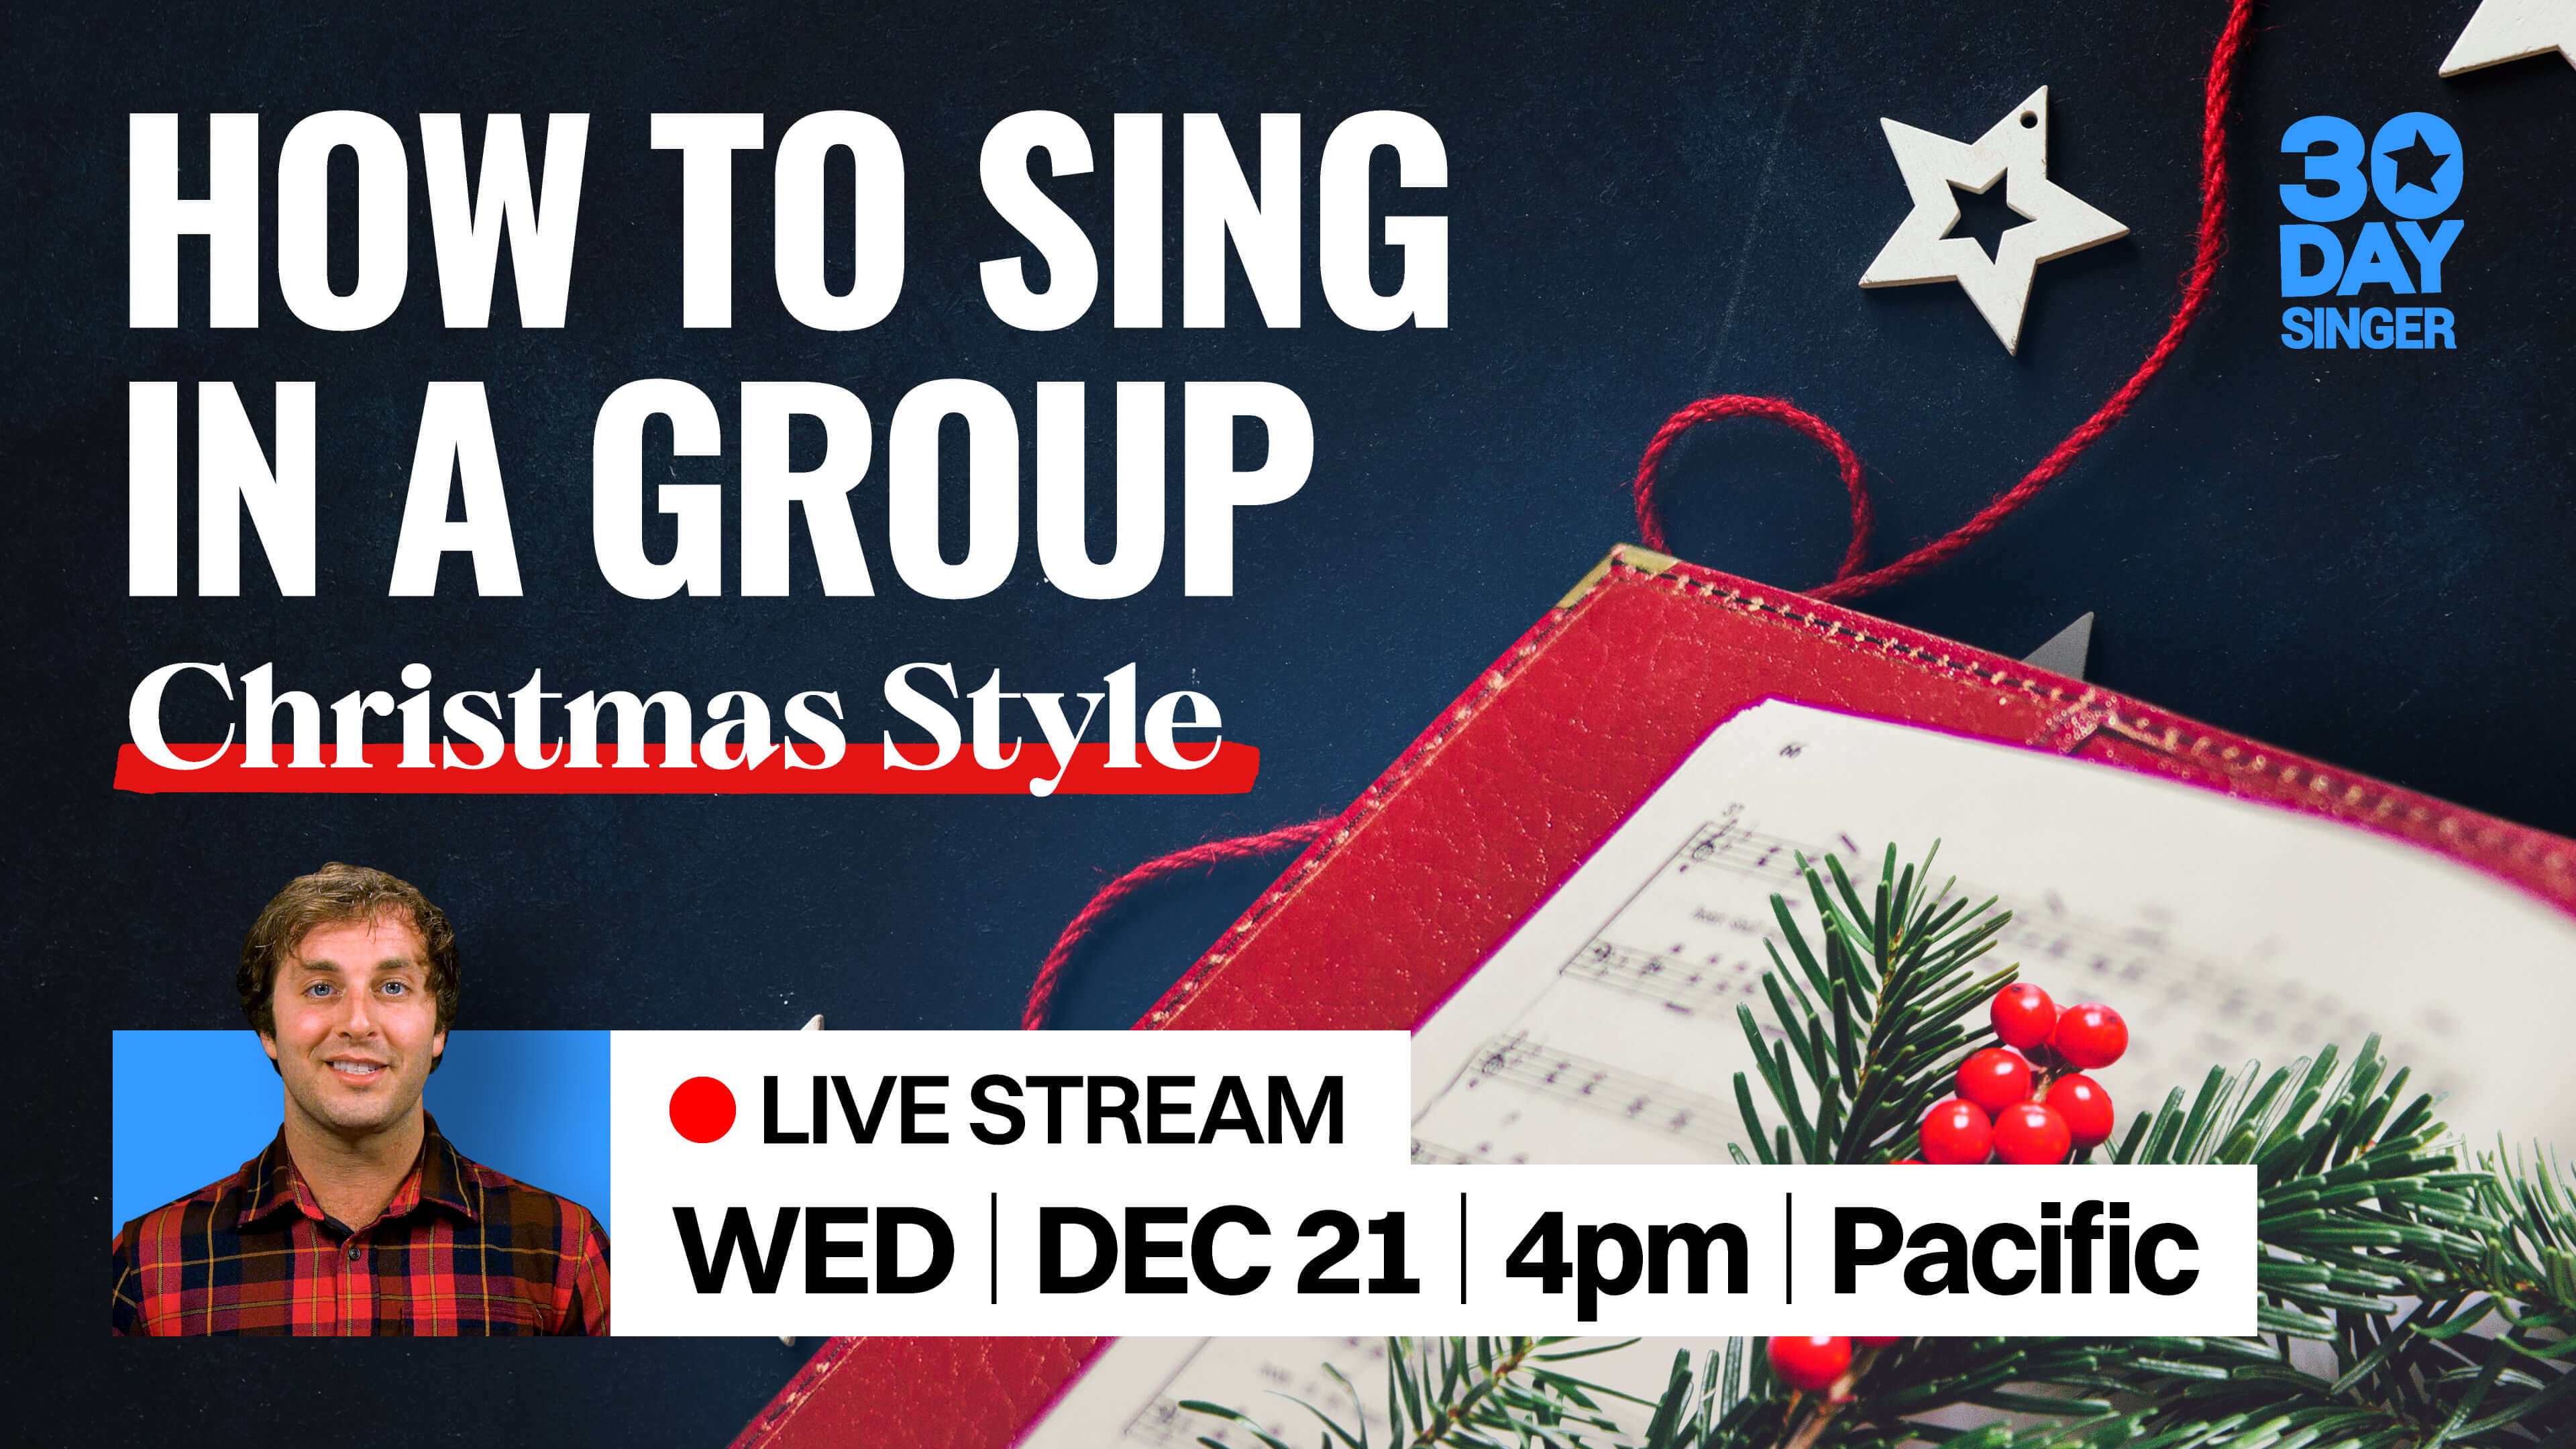 How to Sing in a Group - Christmas Style!